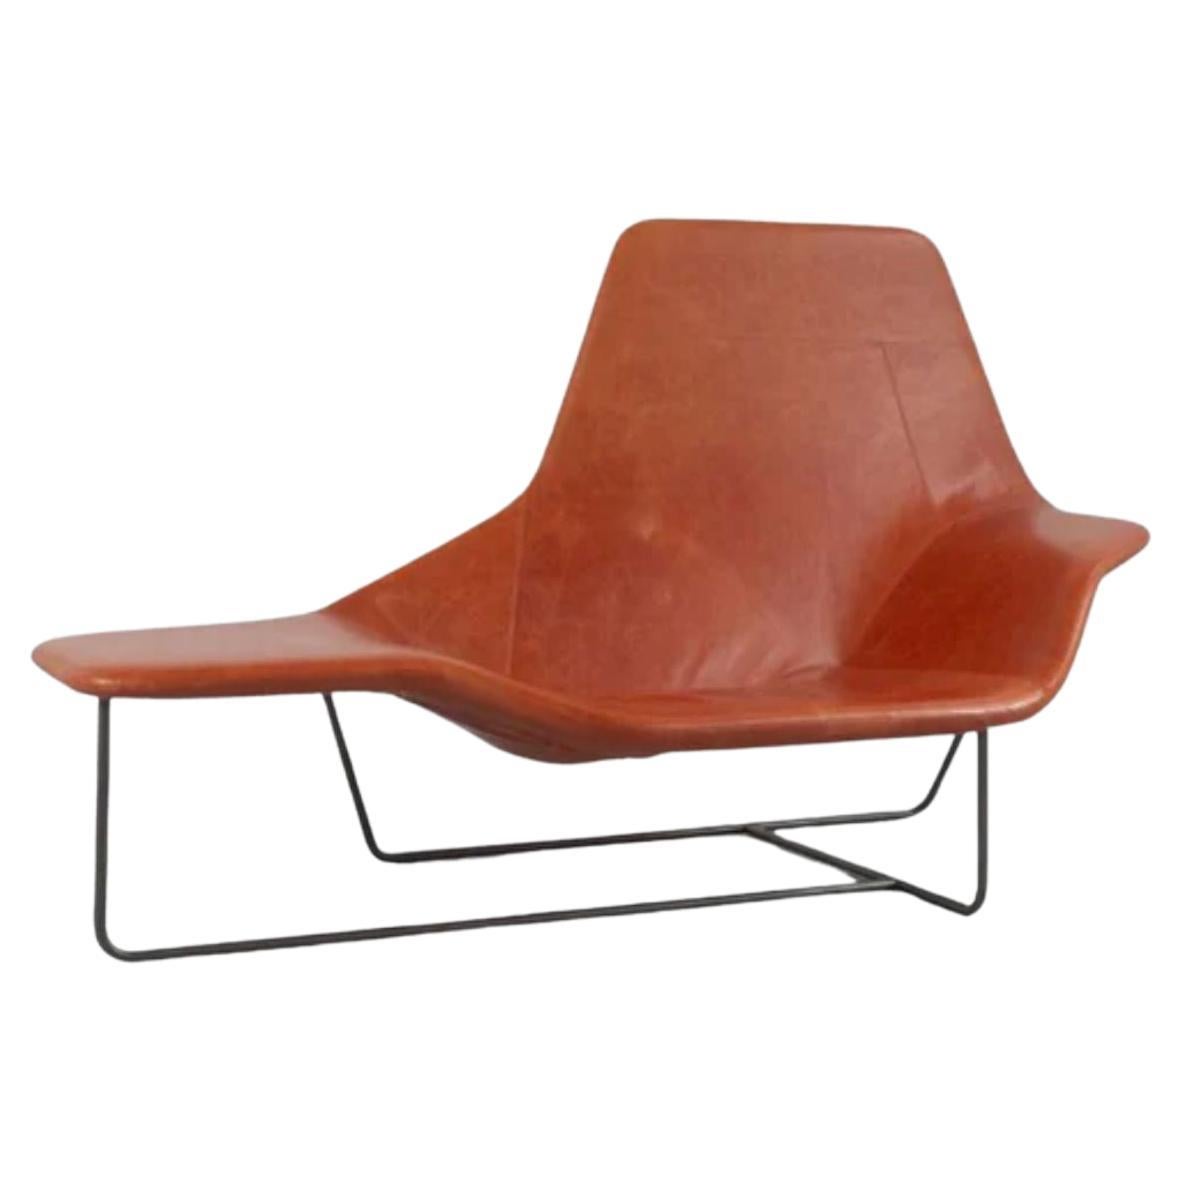 Vintage "Lama" Lounge Chair or Chaise by Ludovica & Roberto Palomba, circa 2000s For Sale